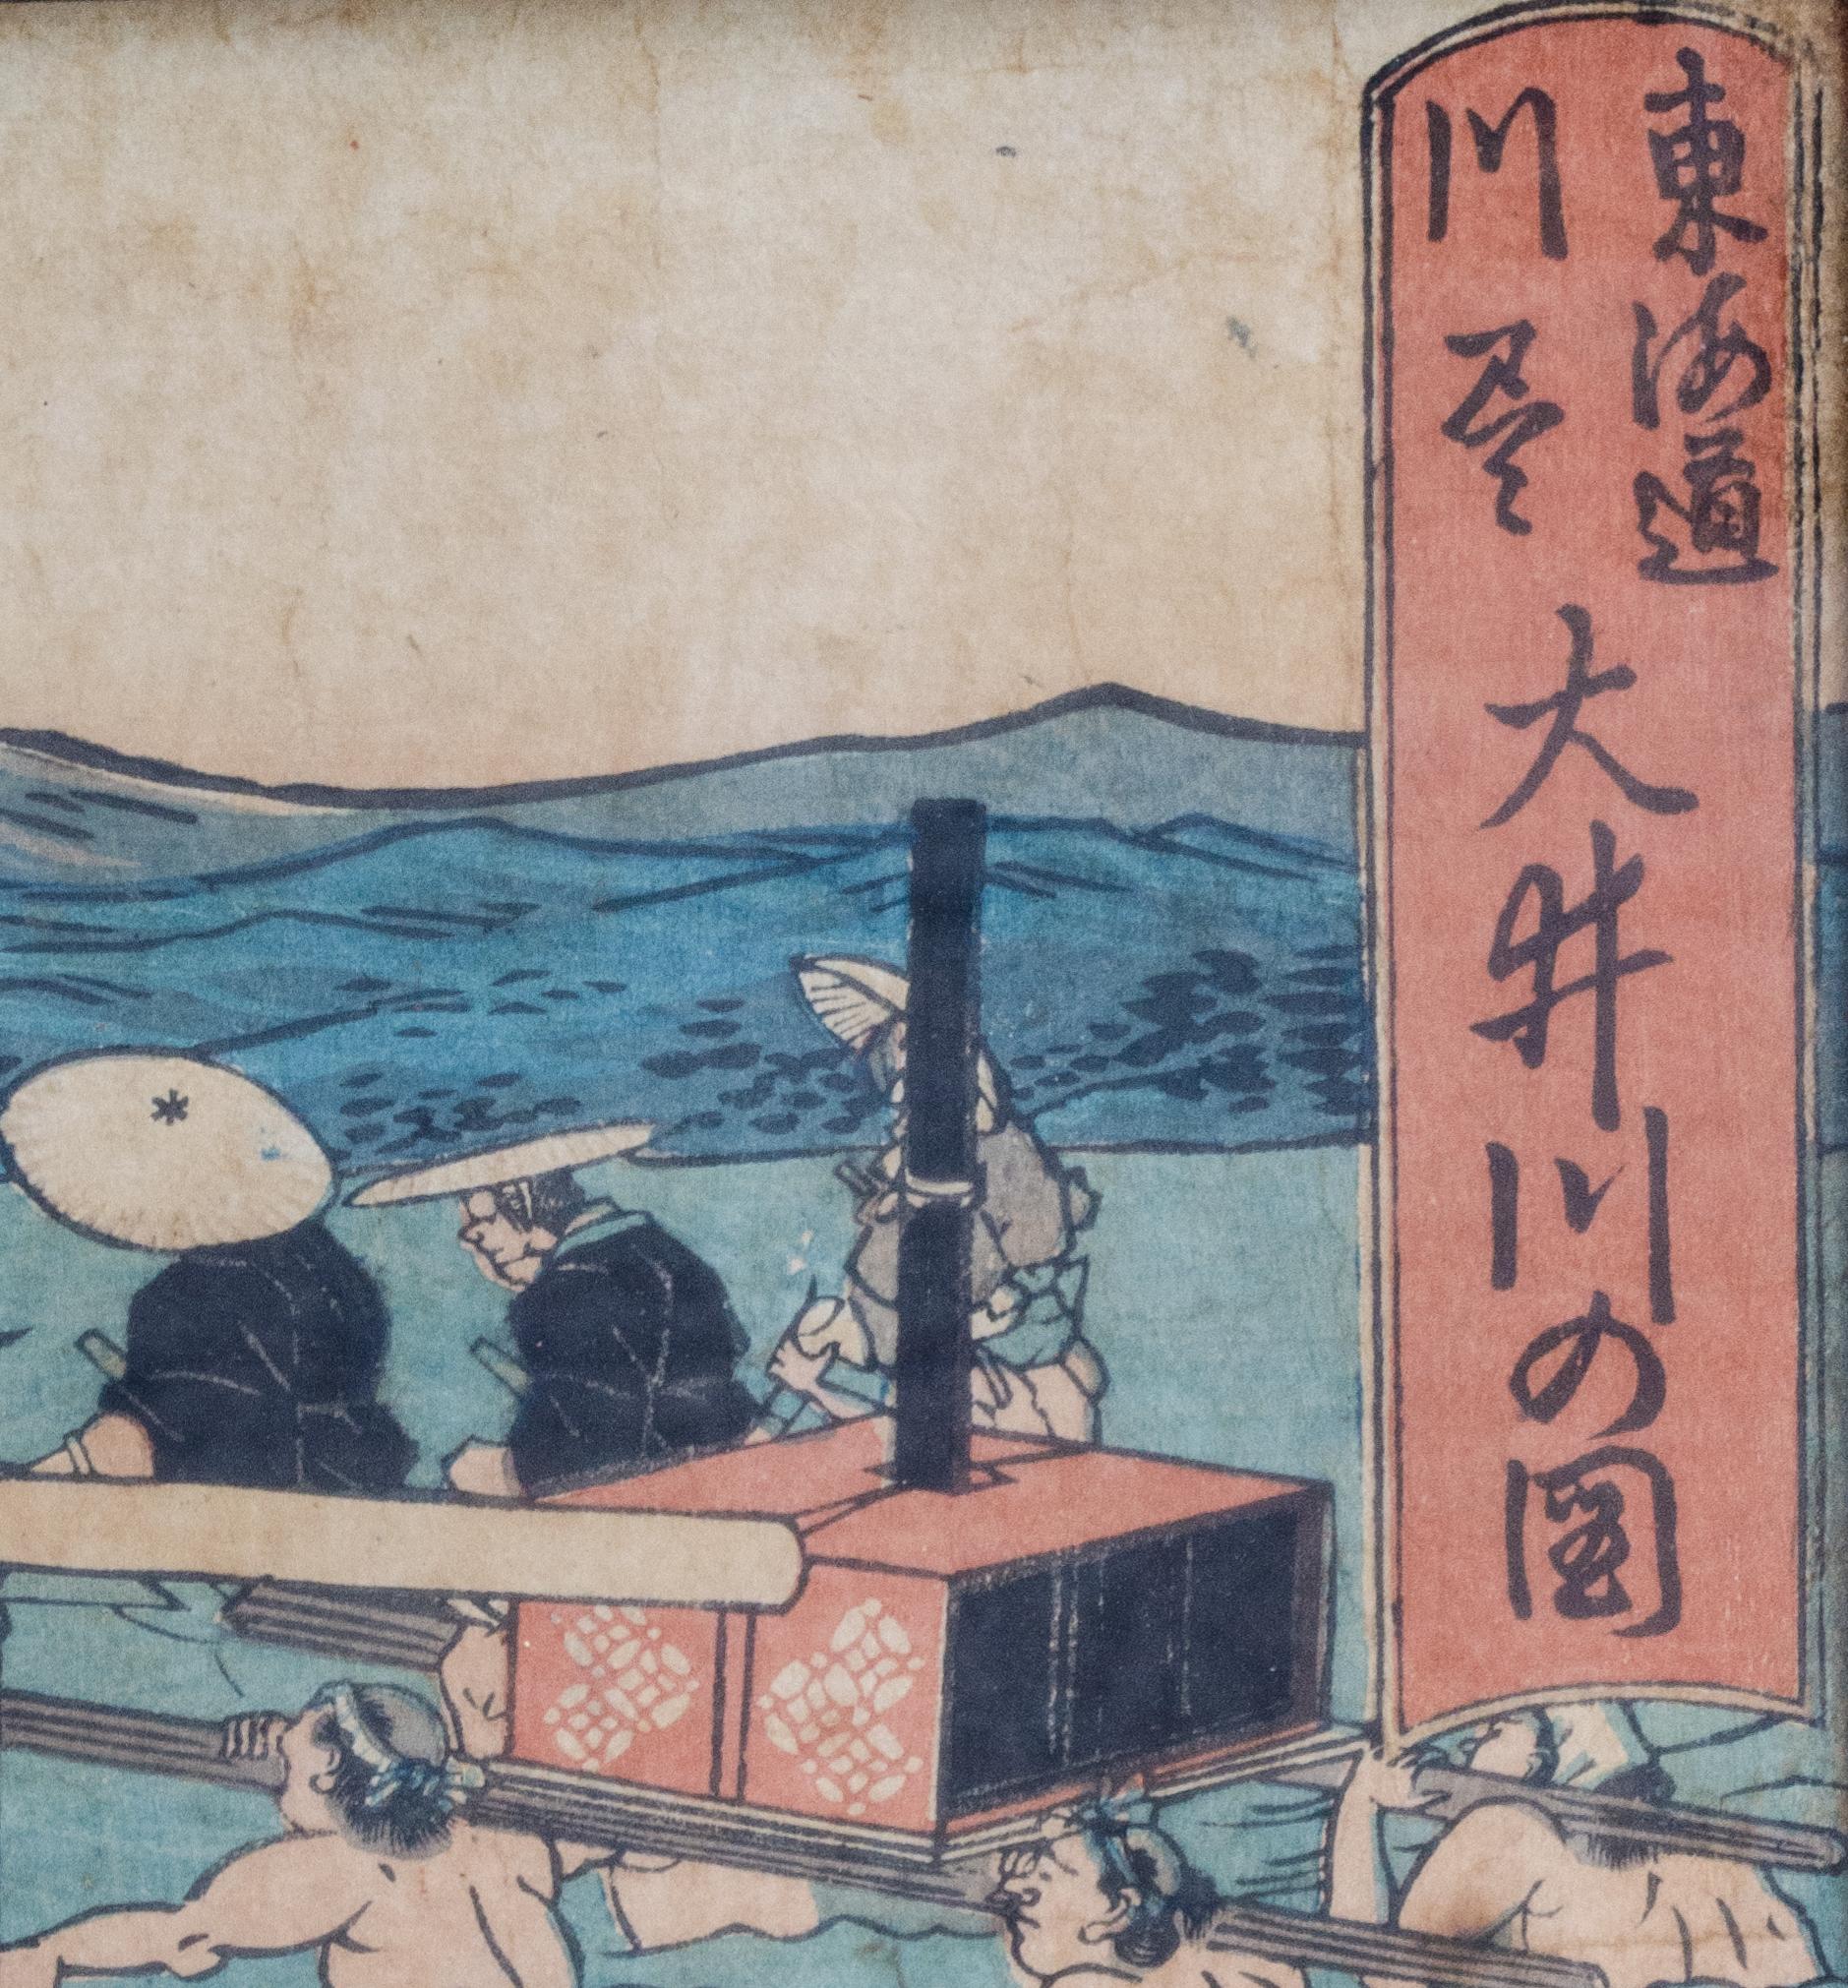 Rare Scene of Nobility on Palanquins Over Water, Ukiyo-e Style Woodcut - Other Art Style Print by Unknown